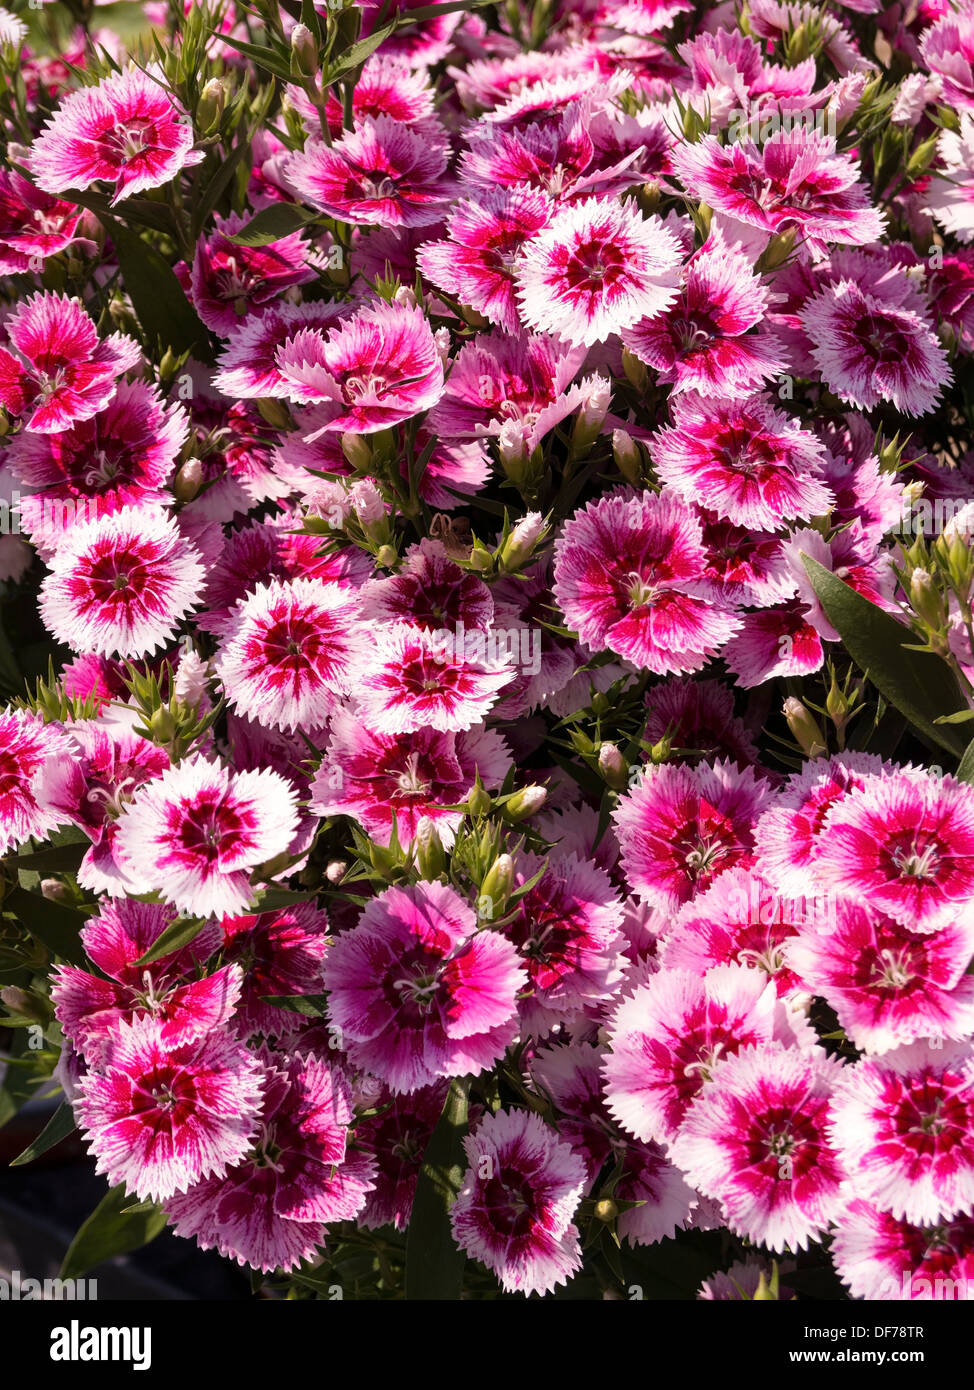 Sunlit white and pink Dianthus Festival White Flame flowers Stock Photo